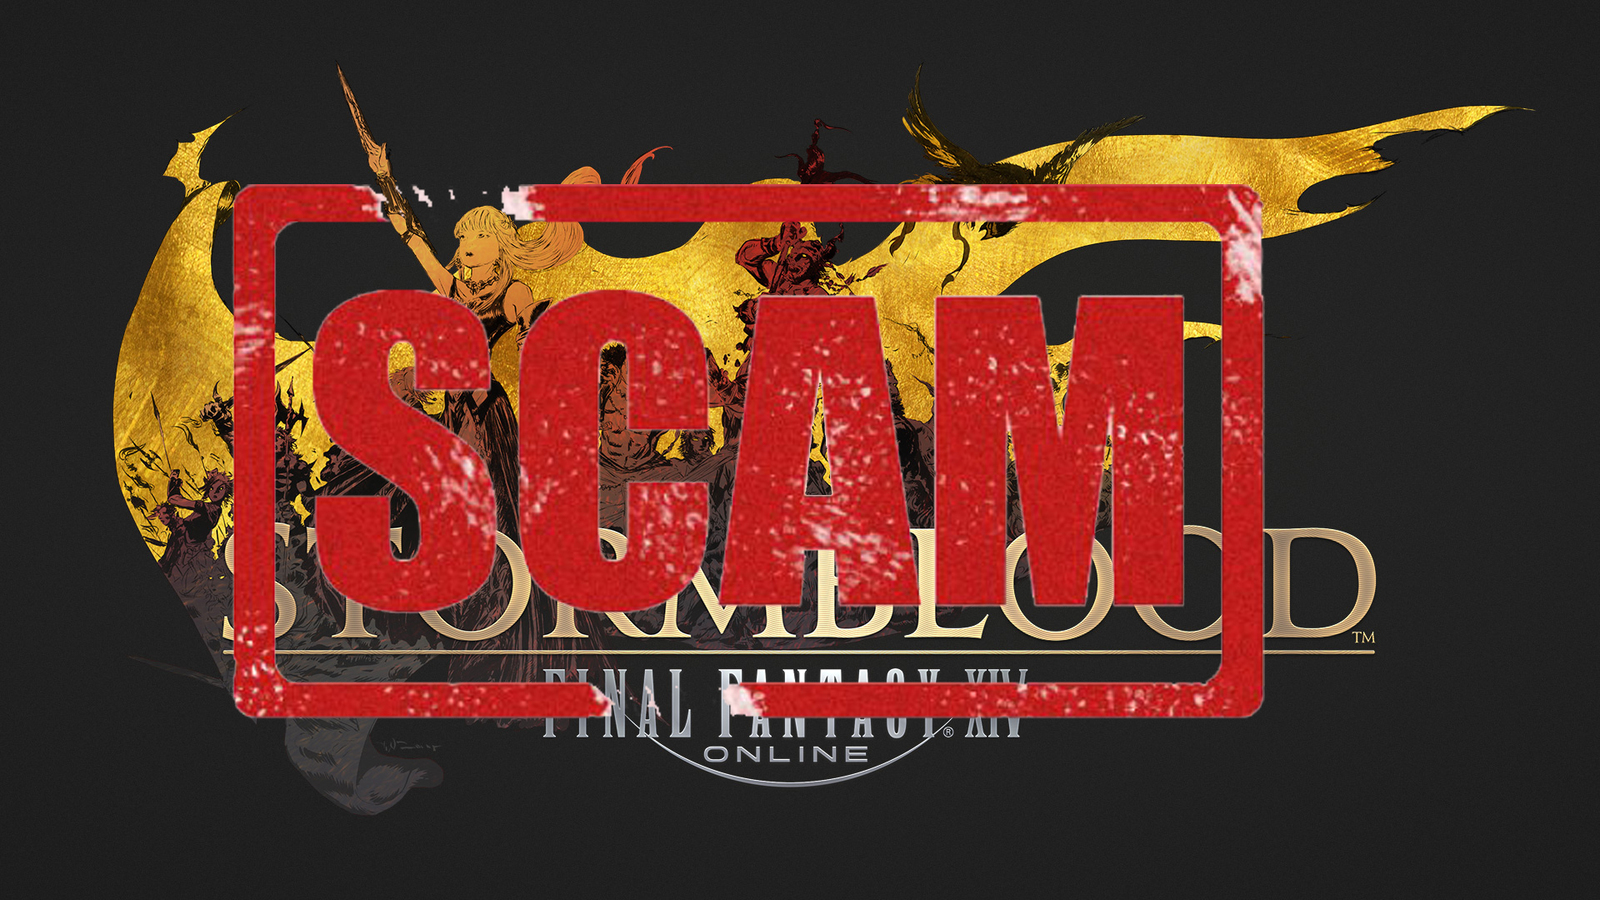 FFXIV players beg Square Enix to rethink NFT plan: “They're a scam